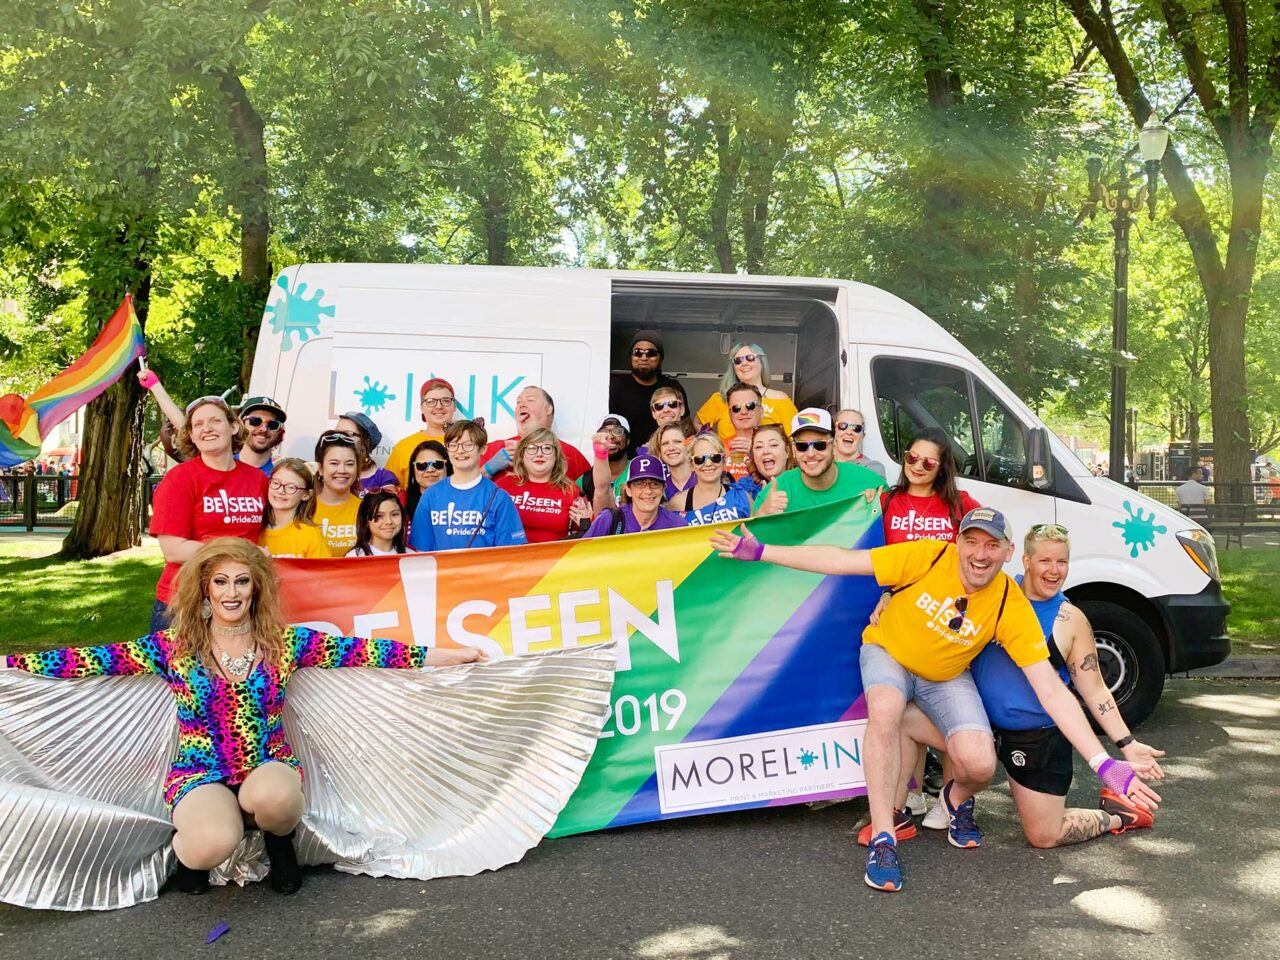 The Morel Ink team poses for the Pride Parade